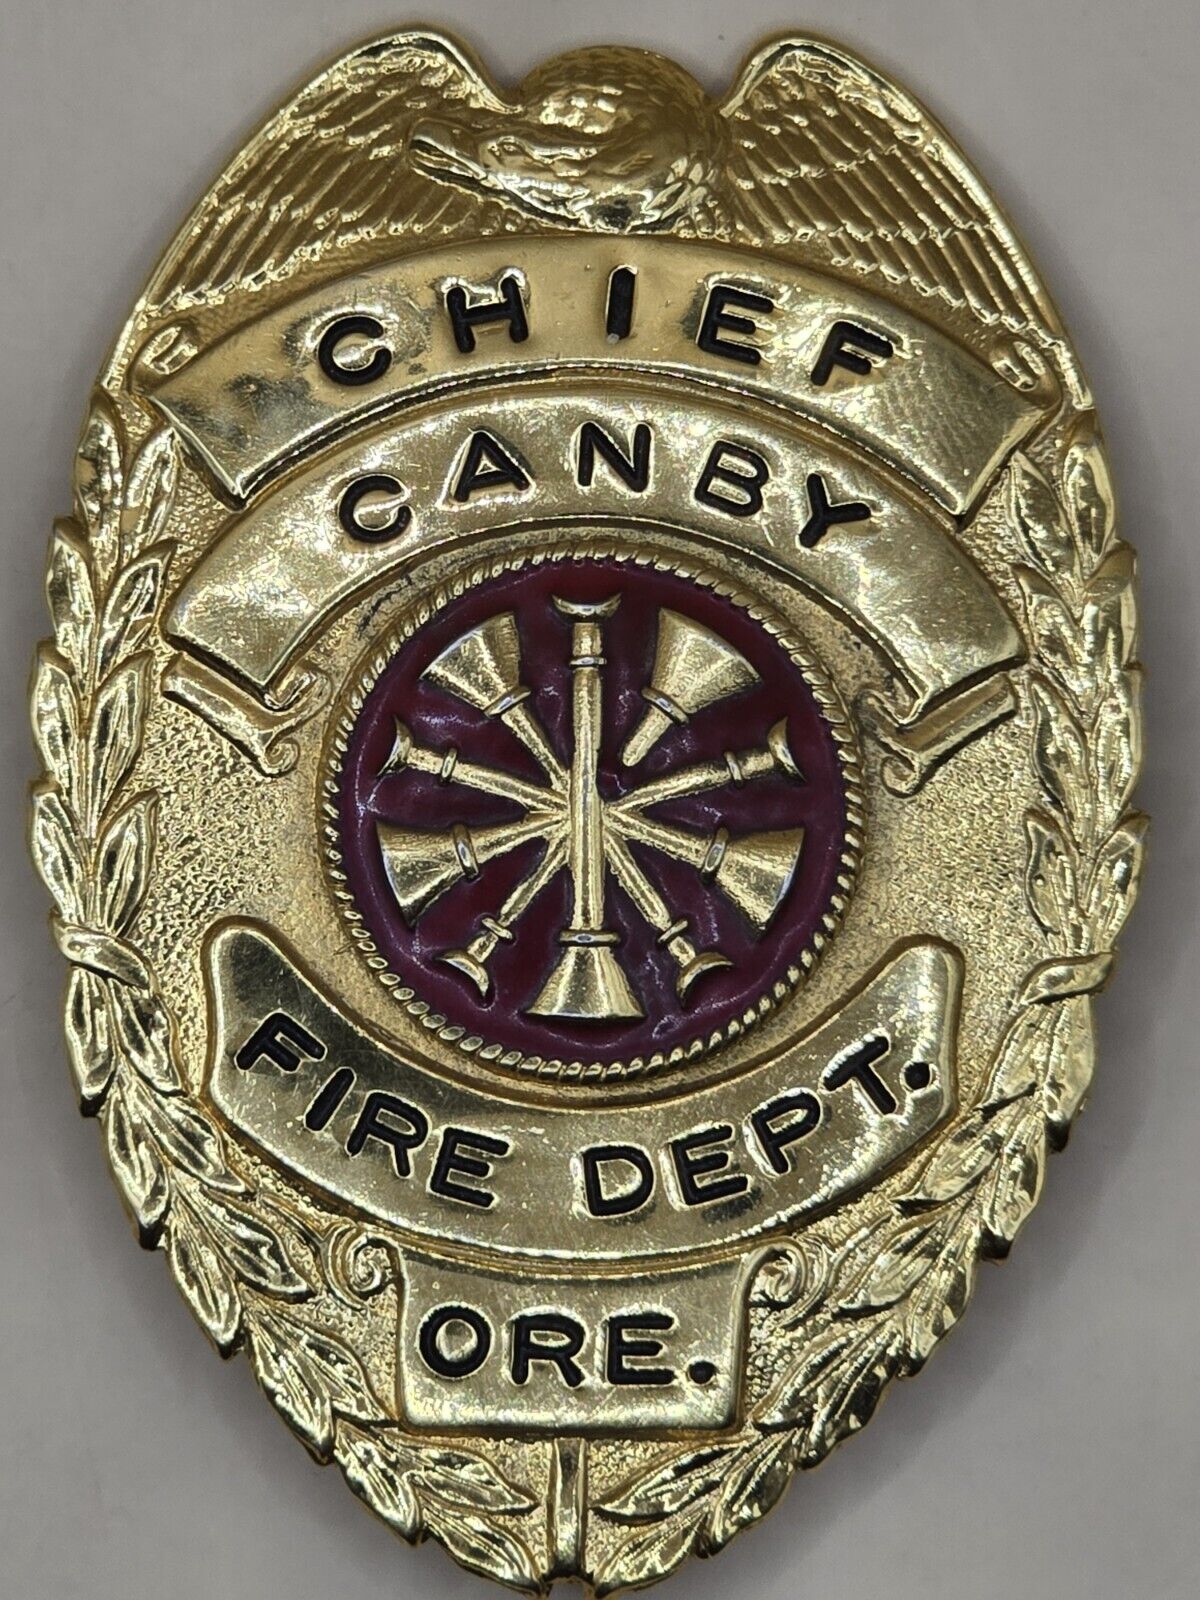 Obsolete FIRE DEPARTMENT BADGE **Cheif Badge** Canby, Oregon-Vintage-RARE